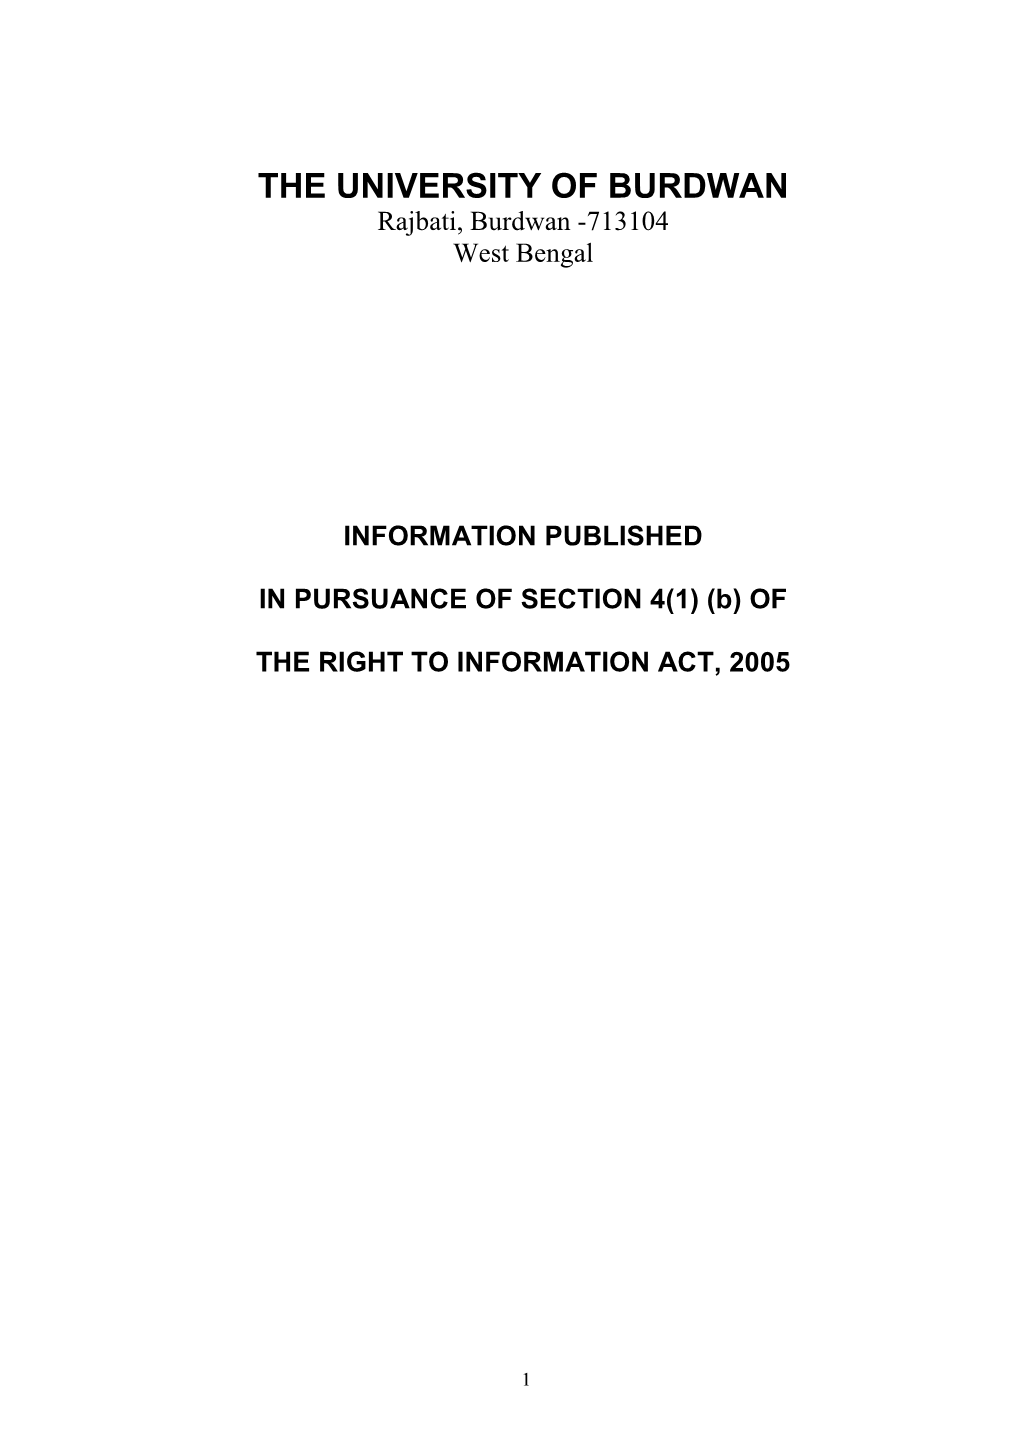 (B) of the RIGHT to INFORMATION ACT, 2005